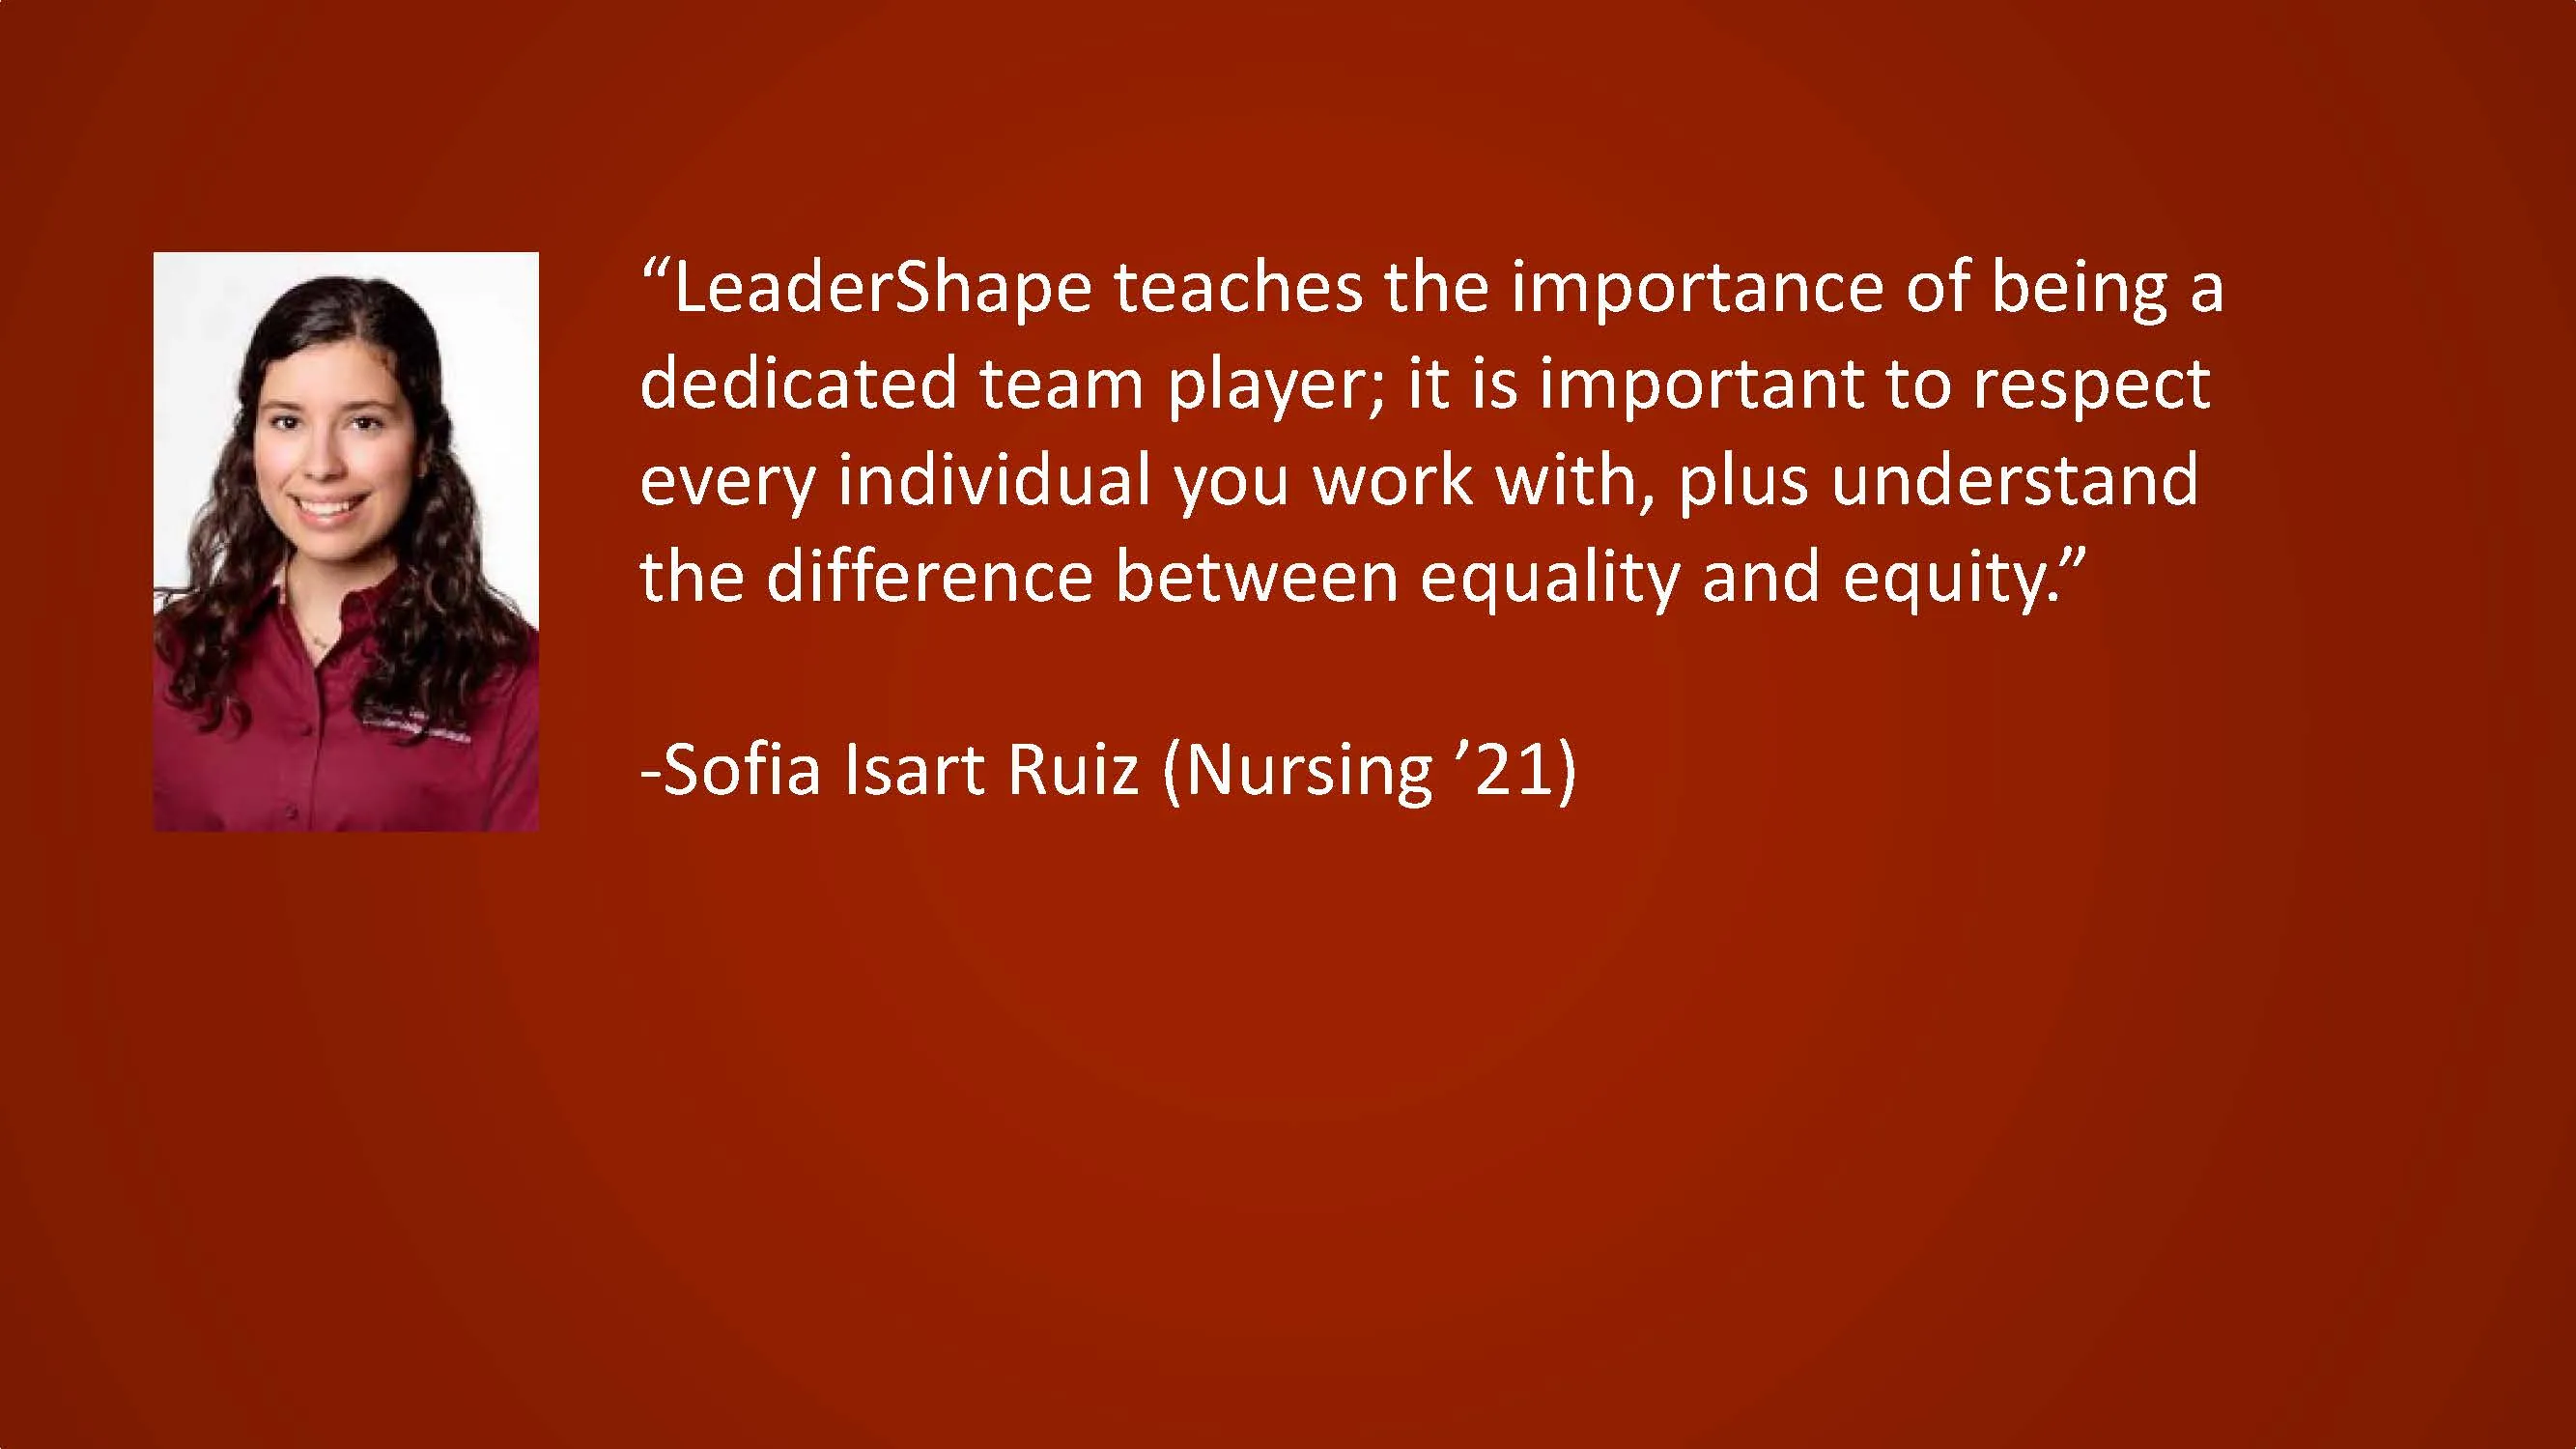 LeaderShape teaches the importance of being a dedicated team player; it is important to respect every individual you work with, plus understand the difference between equality and equity. — Sofia Isart Ruiz (Nursing '21)